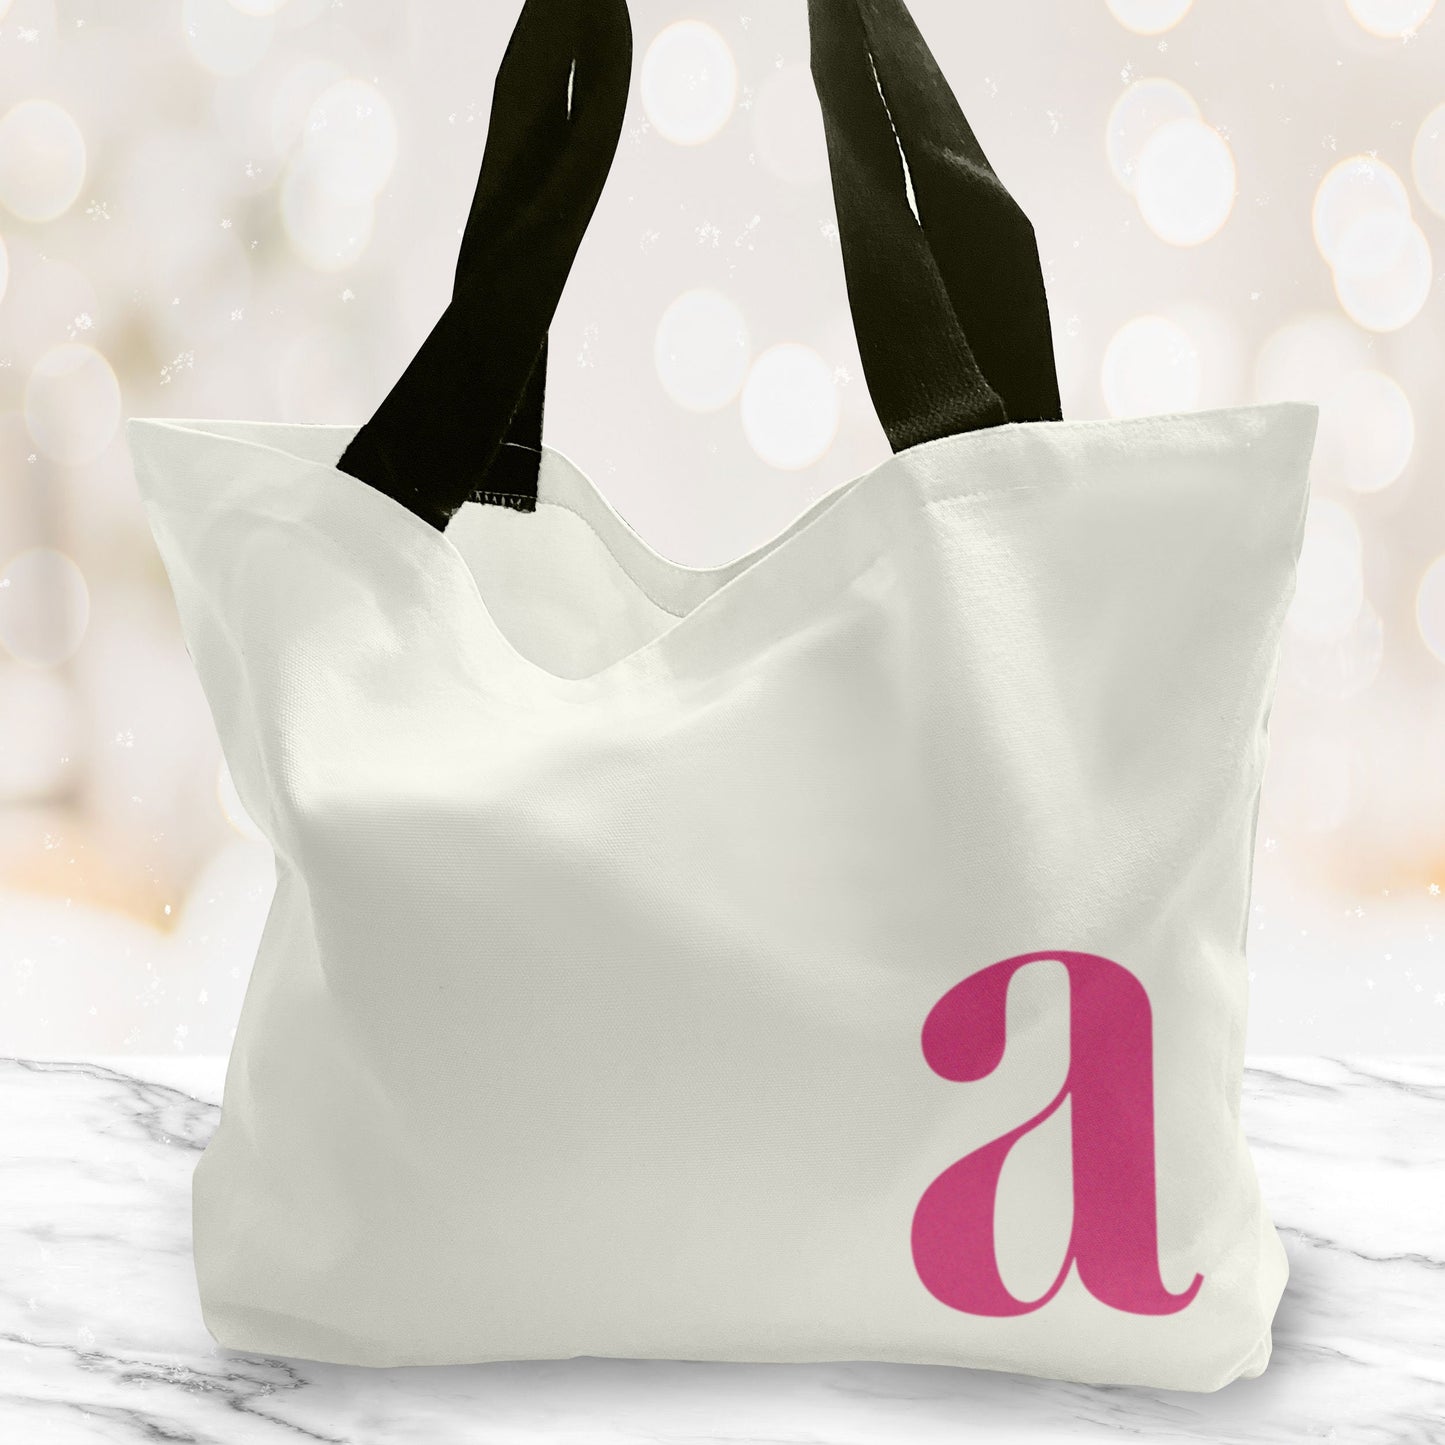 Personalised Initial Large Tote Bag. Large Shopping bag. Birthday Gift. Mother's Day Gift Unique Gift Idea. Cute Tote Bag. Gifts for her.